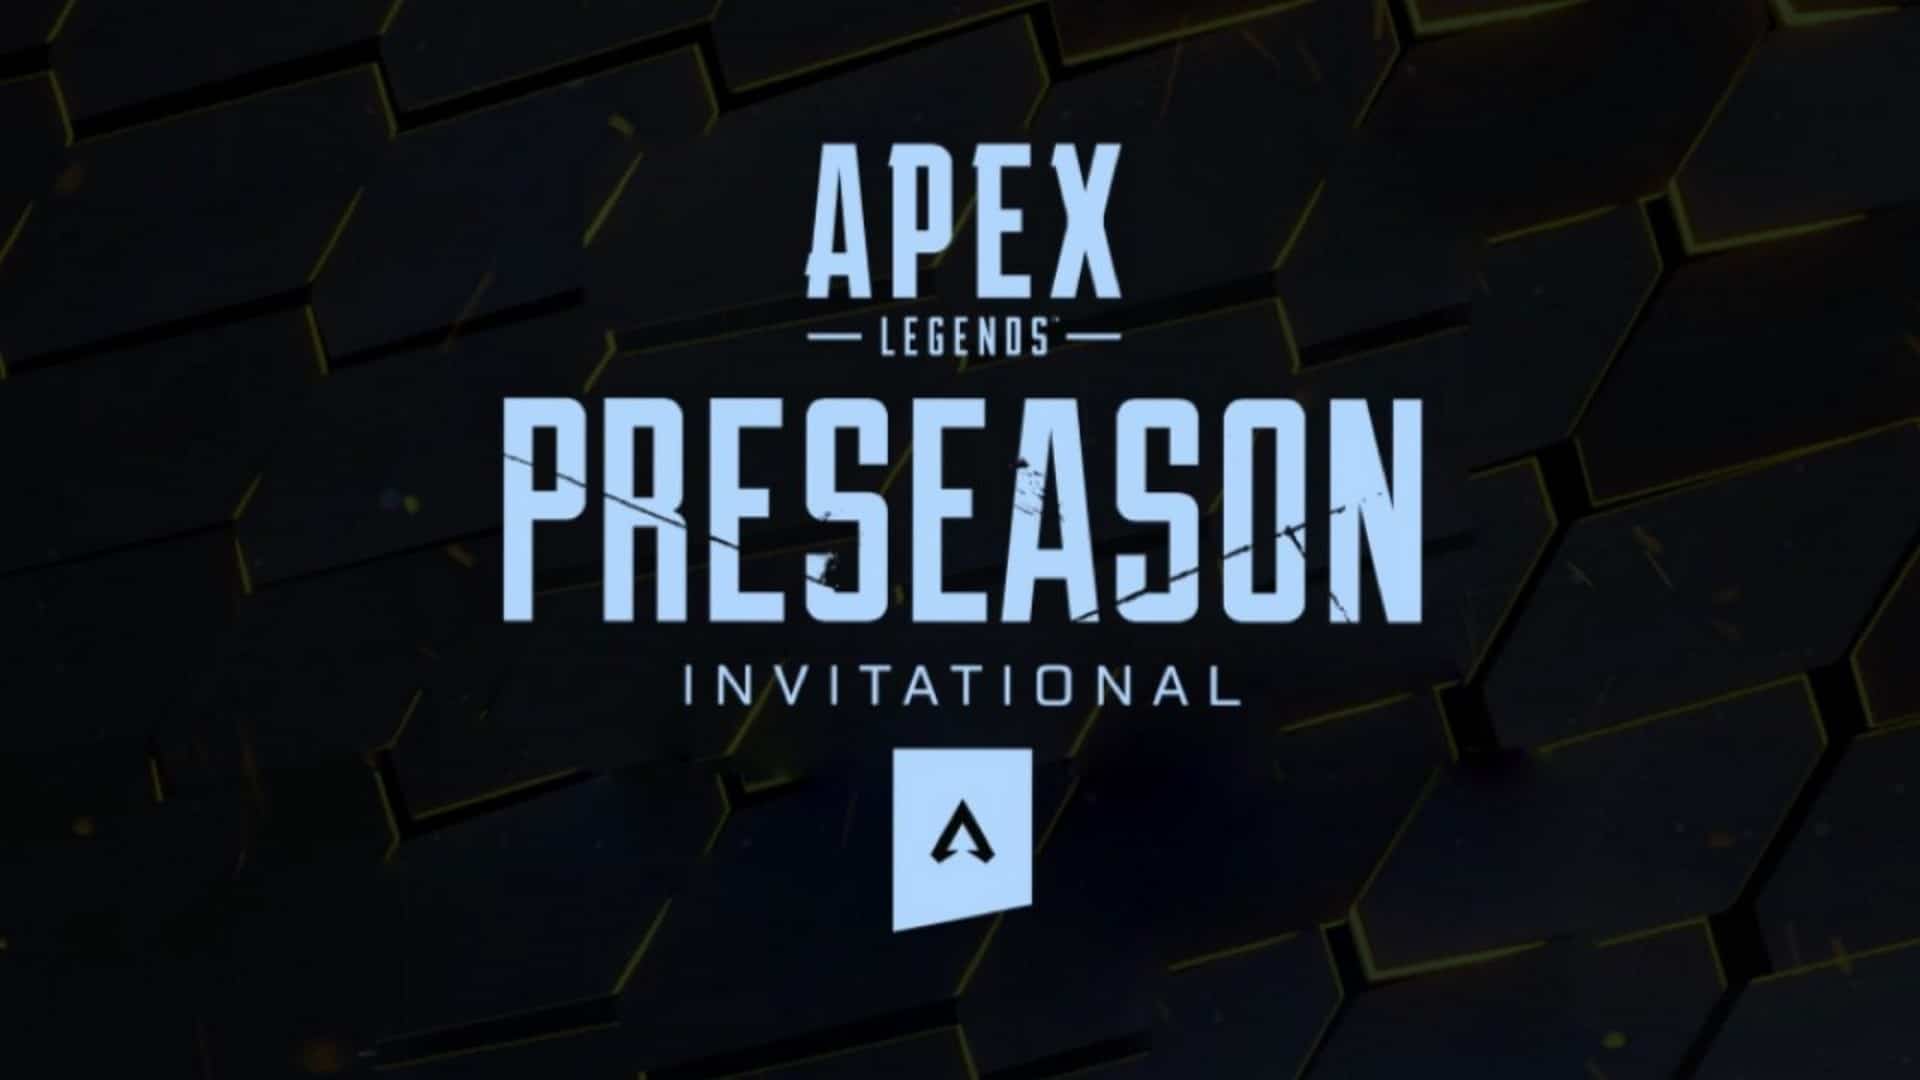 Apex Legends Pre-Season Invitational – Catch All The Action September 13 – 16